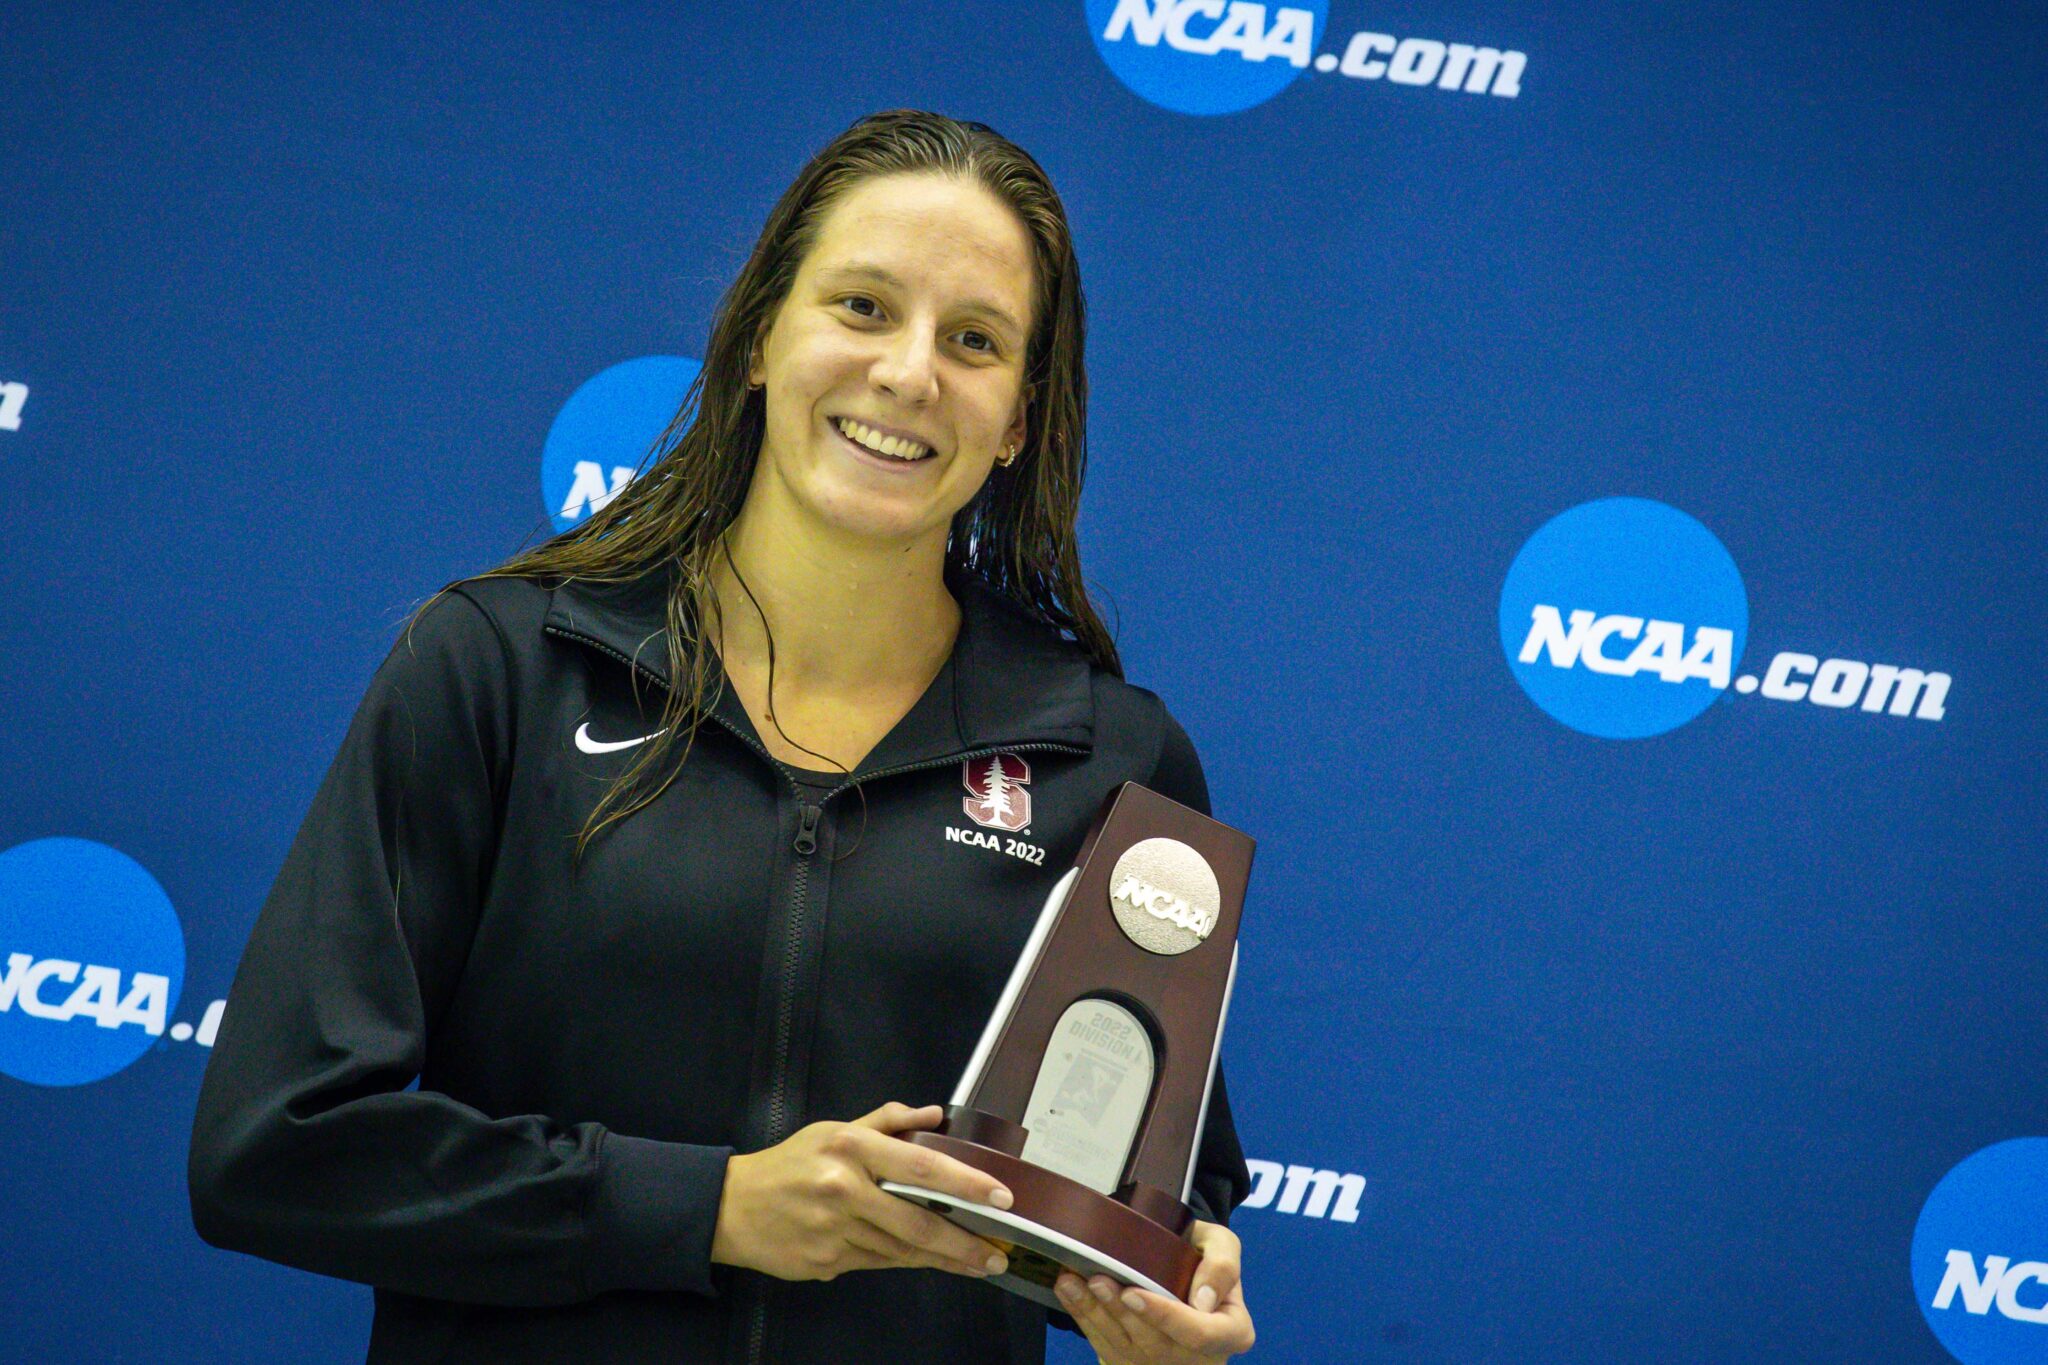 Brooke Forde, Emma Nordin Among NCAA Woman of the Year Top 30 Nominees